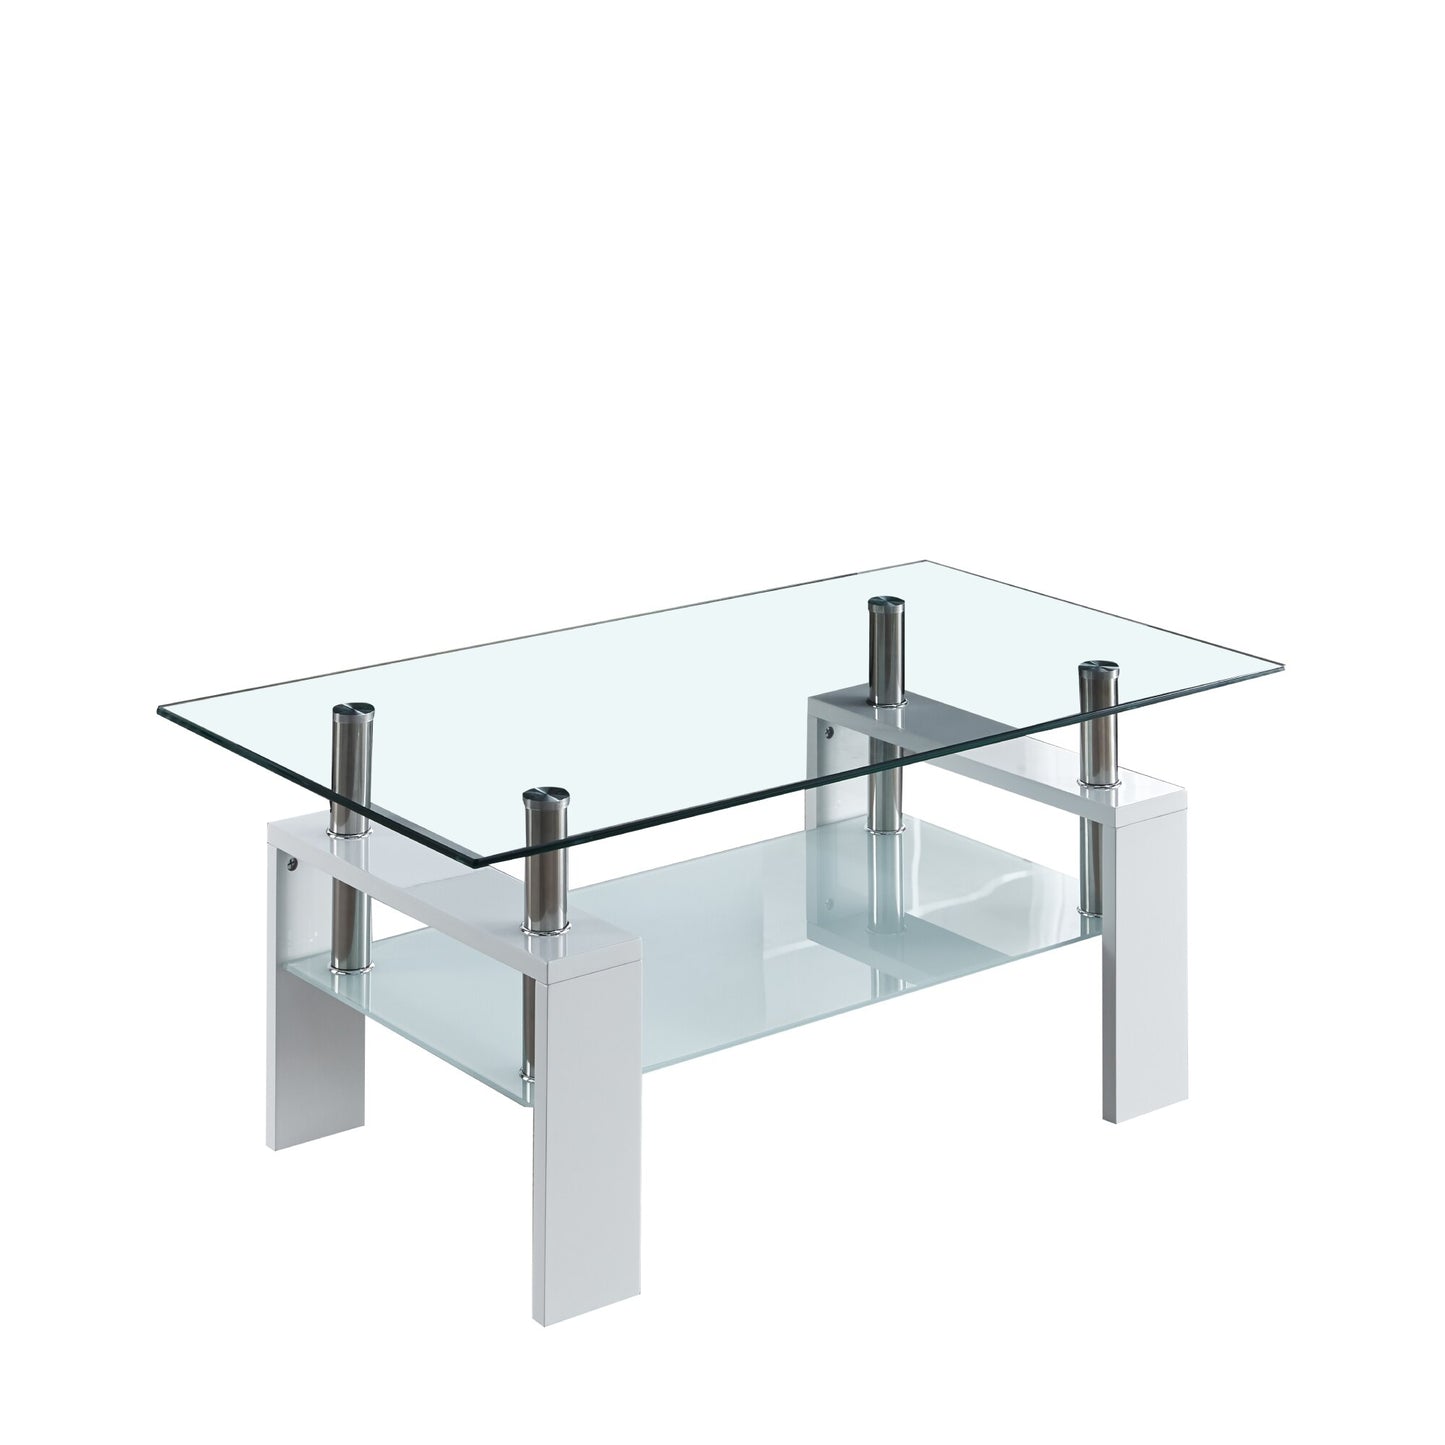 Artisan Center Coffee Table 2-Layer Tempered Glass Top Stainless Steel Legs for Living Room 37"Lx22"Dx16"H Black/White[US-W]